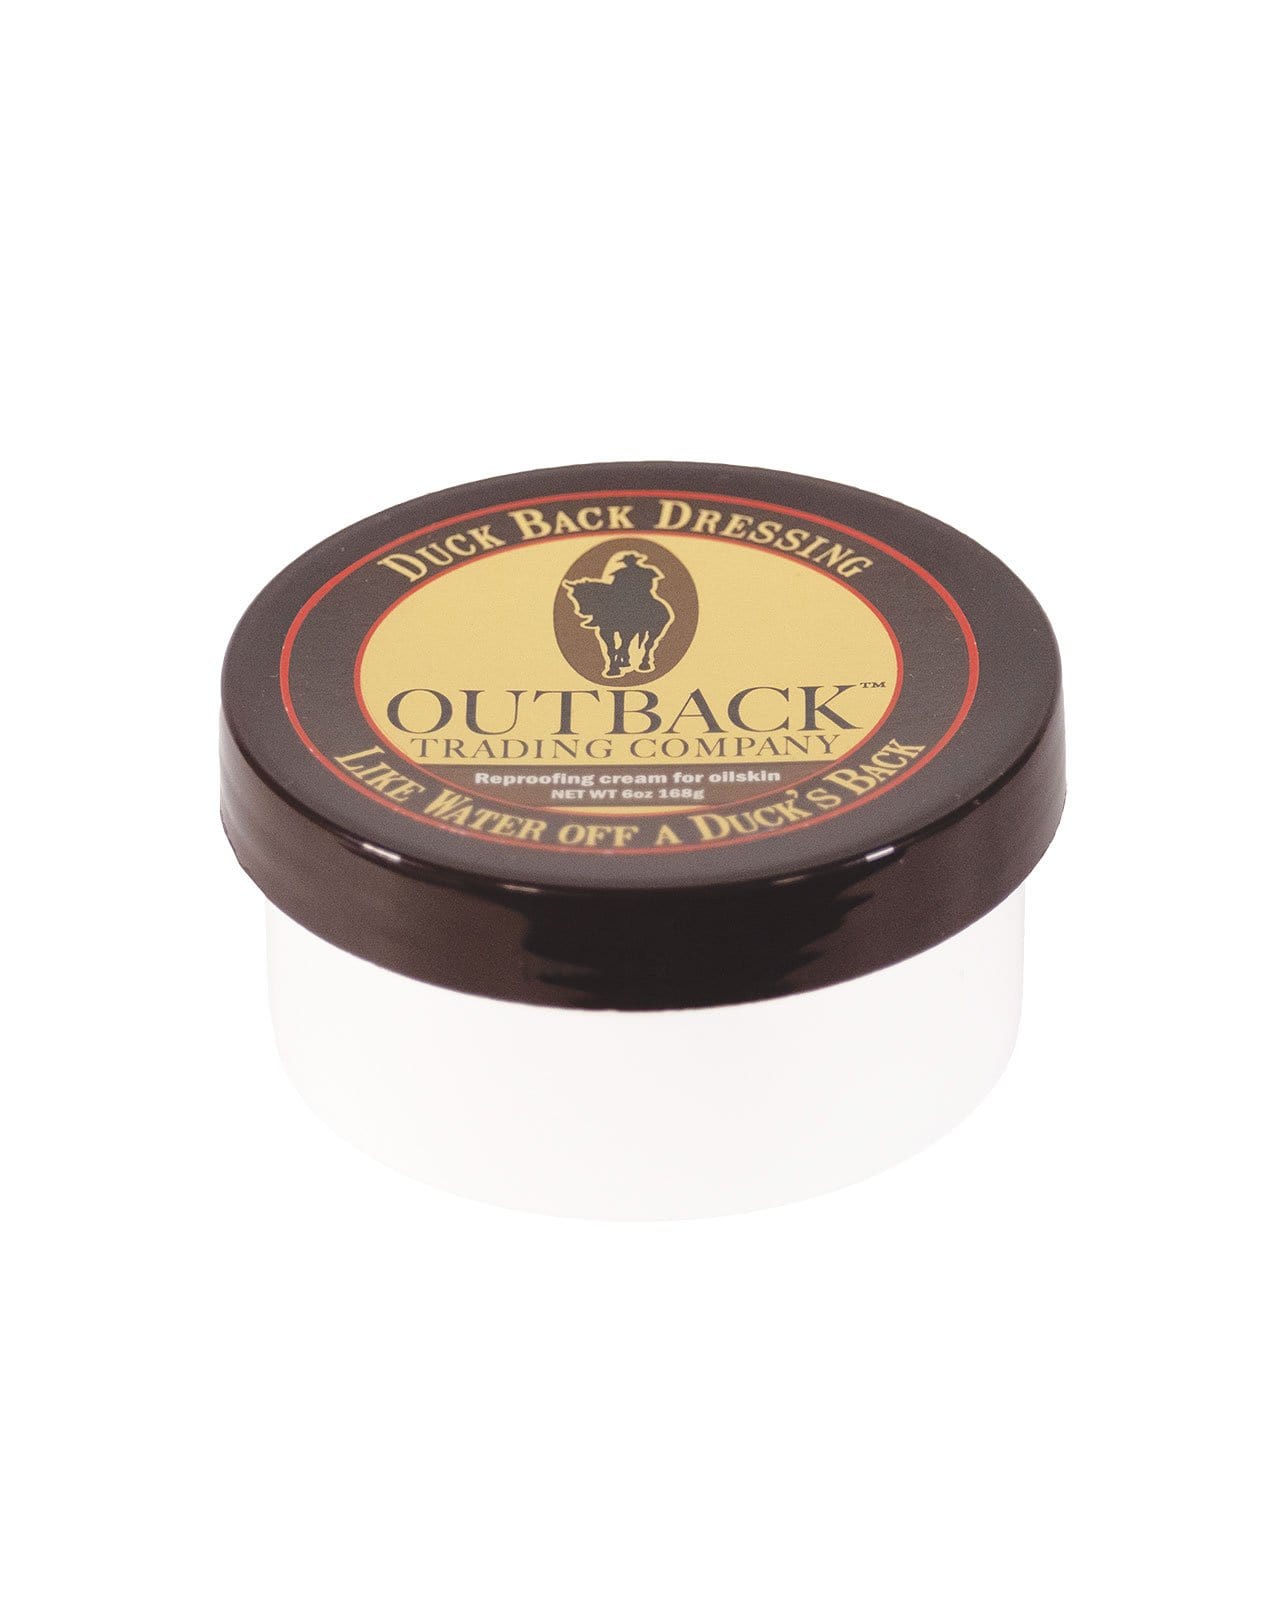 Outback Trading Company Duck Back Dressing None / ONE 1999-NON-ONE 789043019230 Accessories